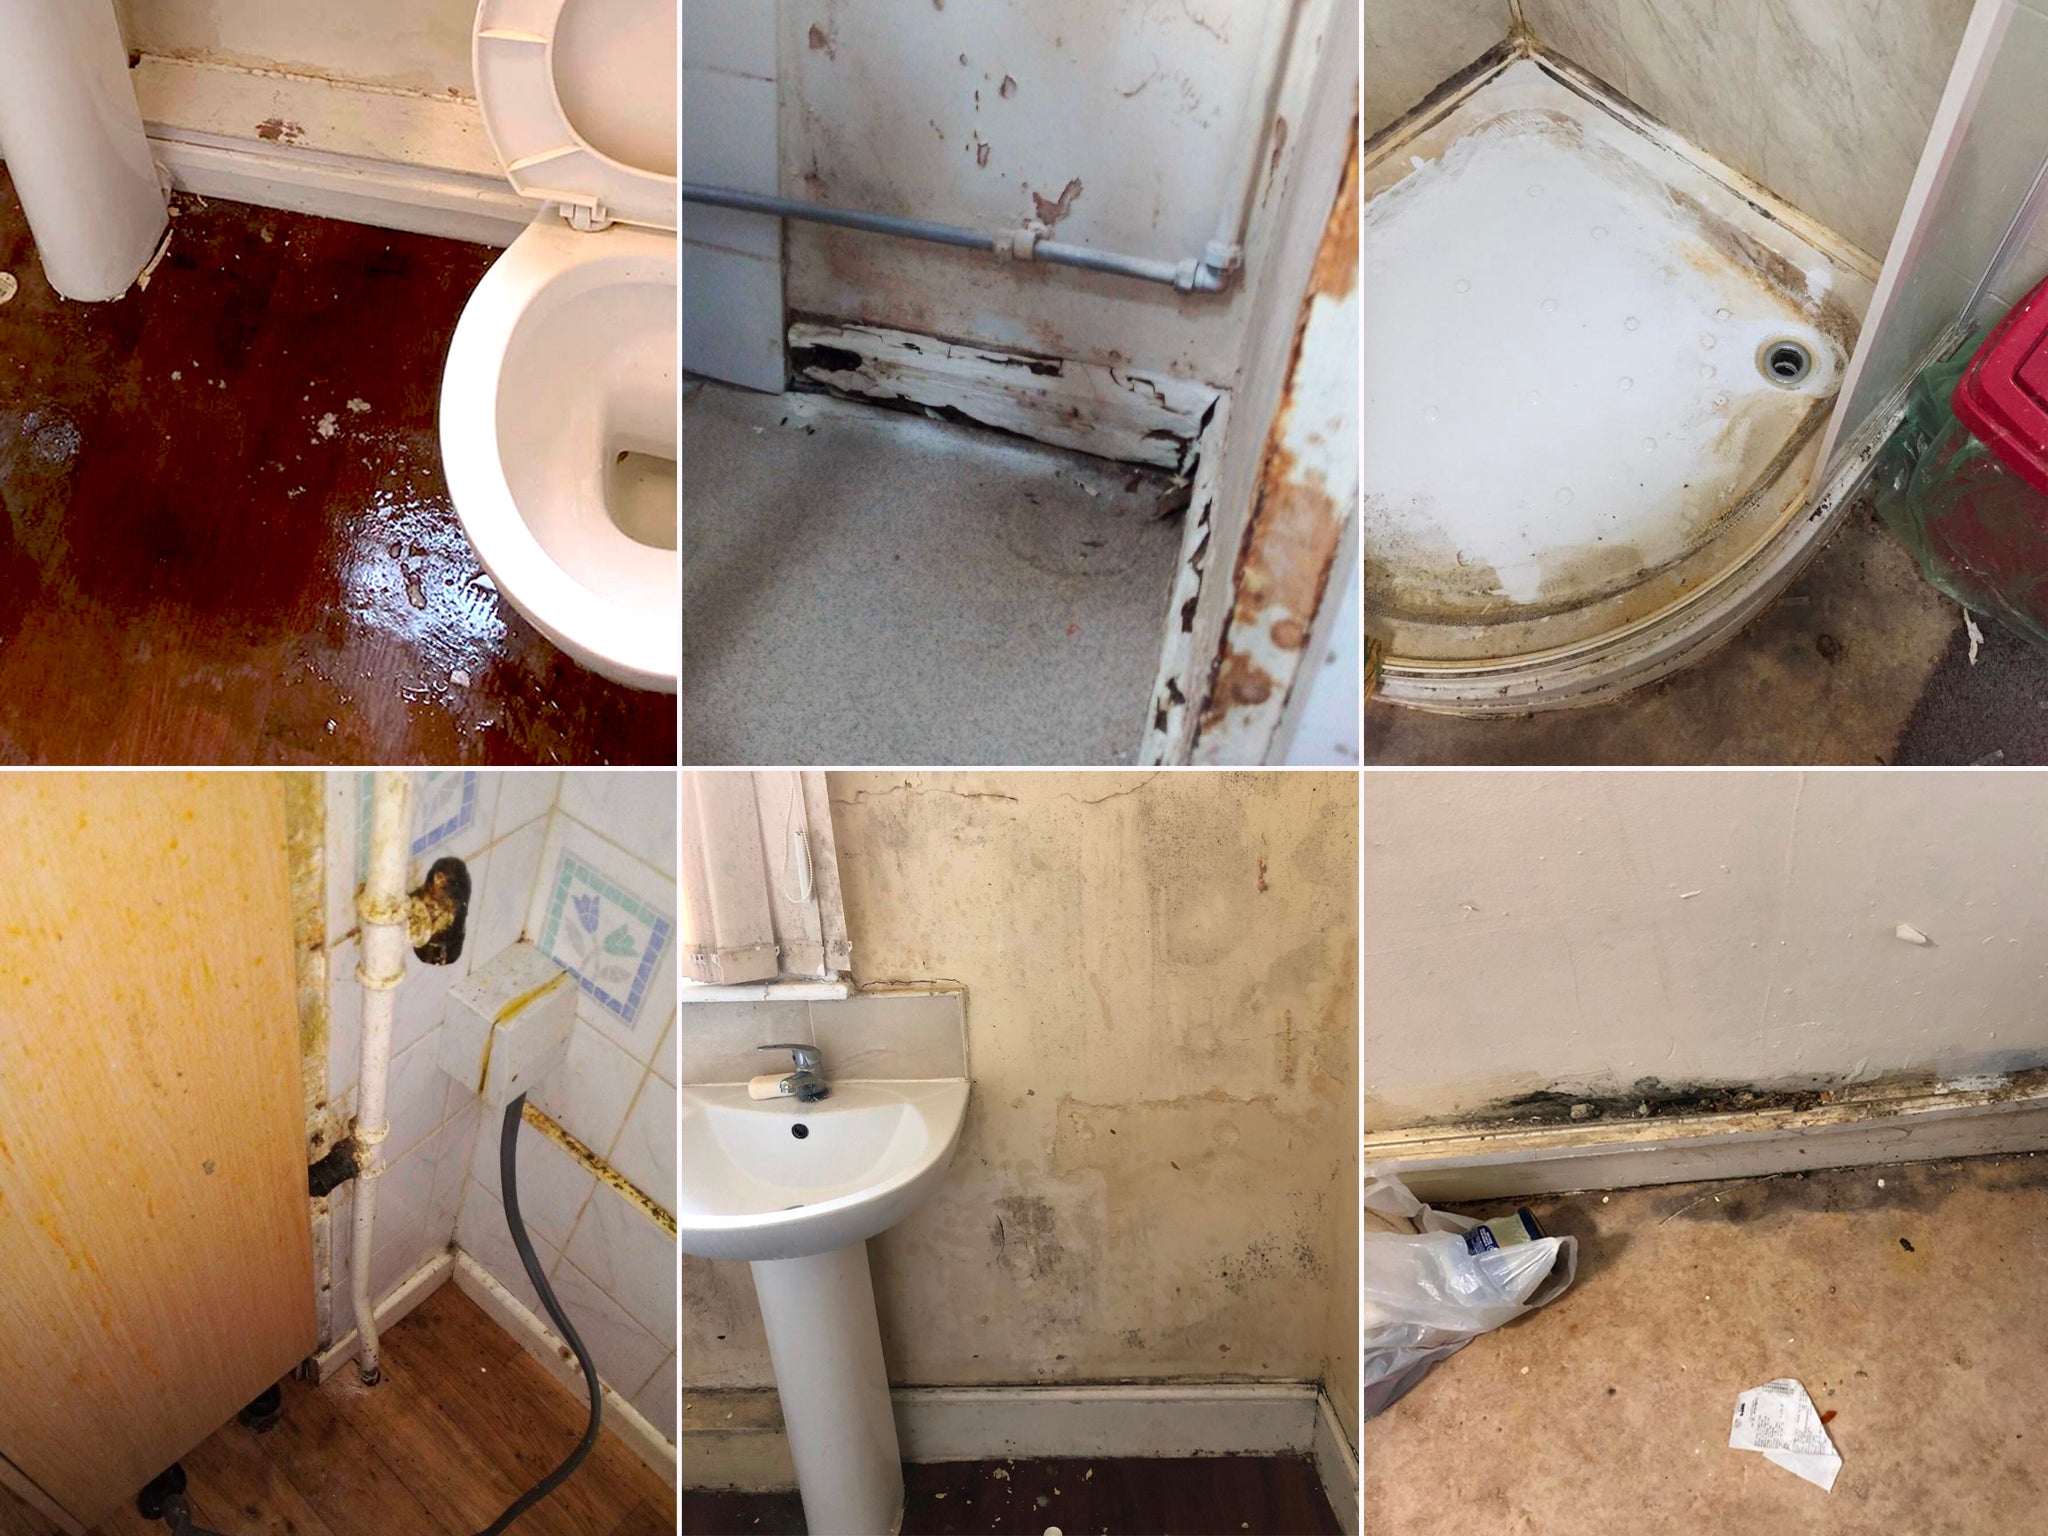 Campaigners say vulnerable people are being moved from ‘one horrendous situation into another’, often ending up in damp and dirty housing